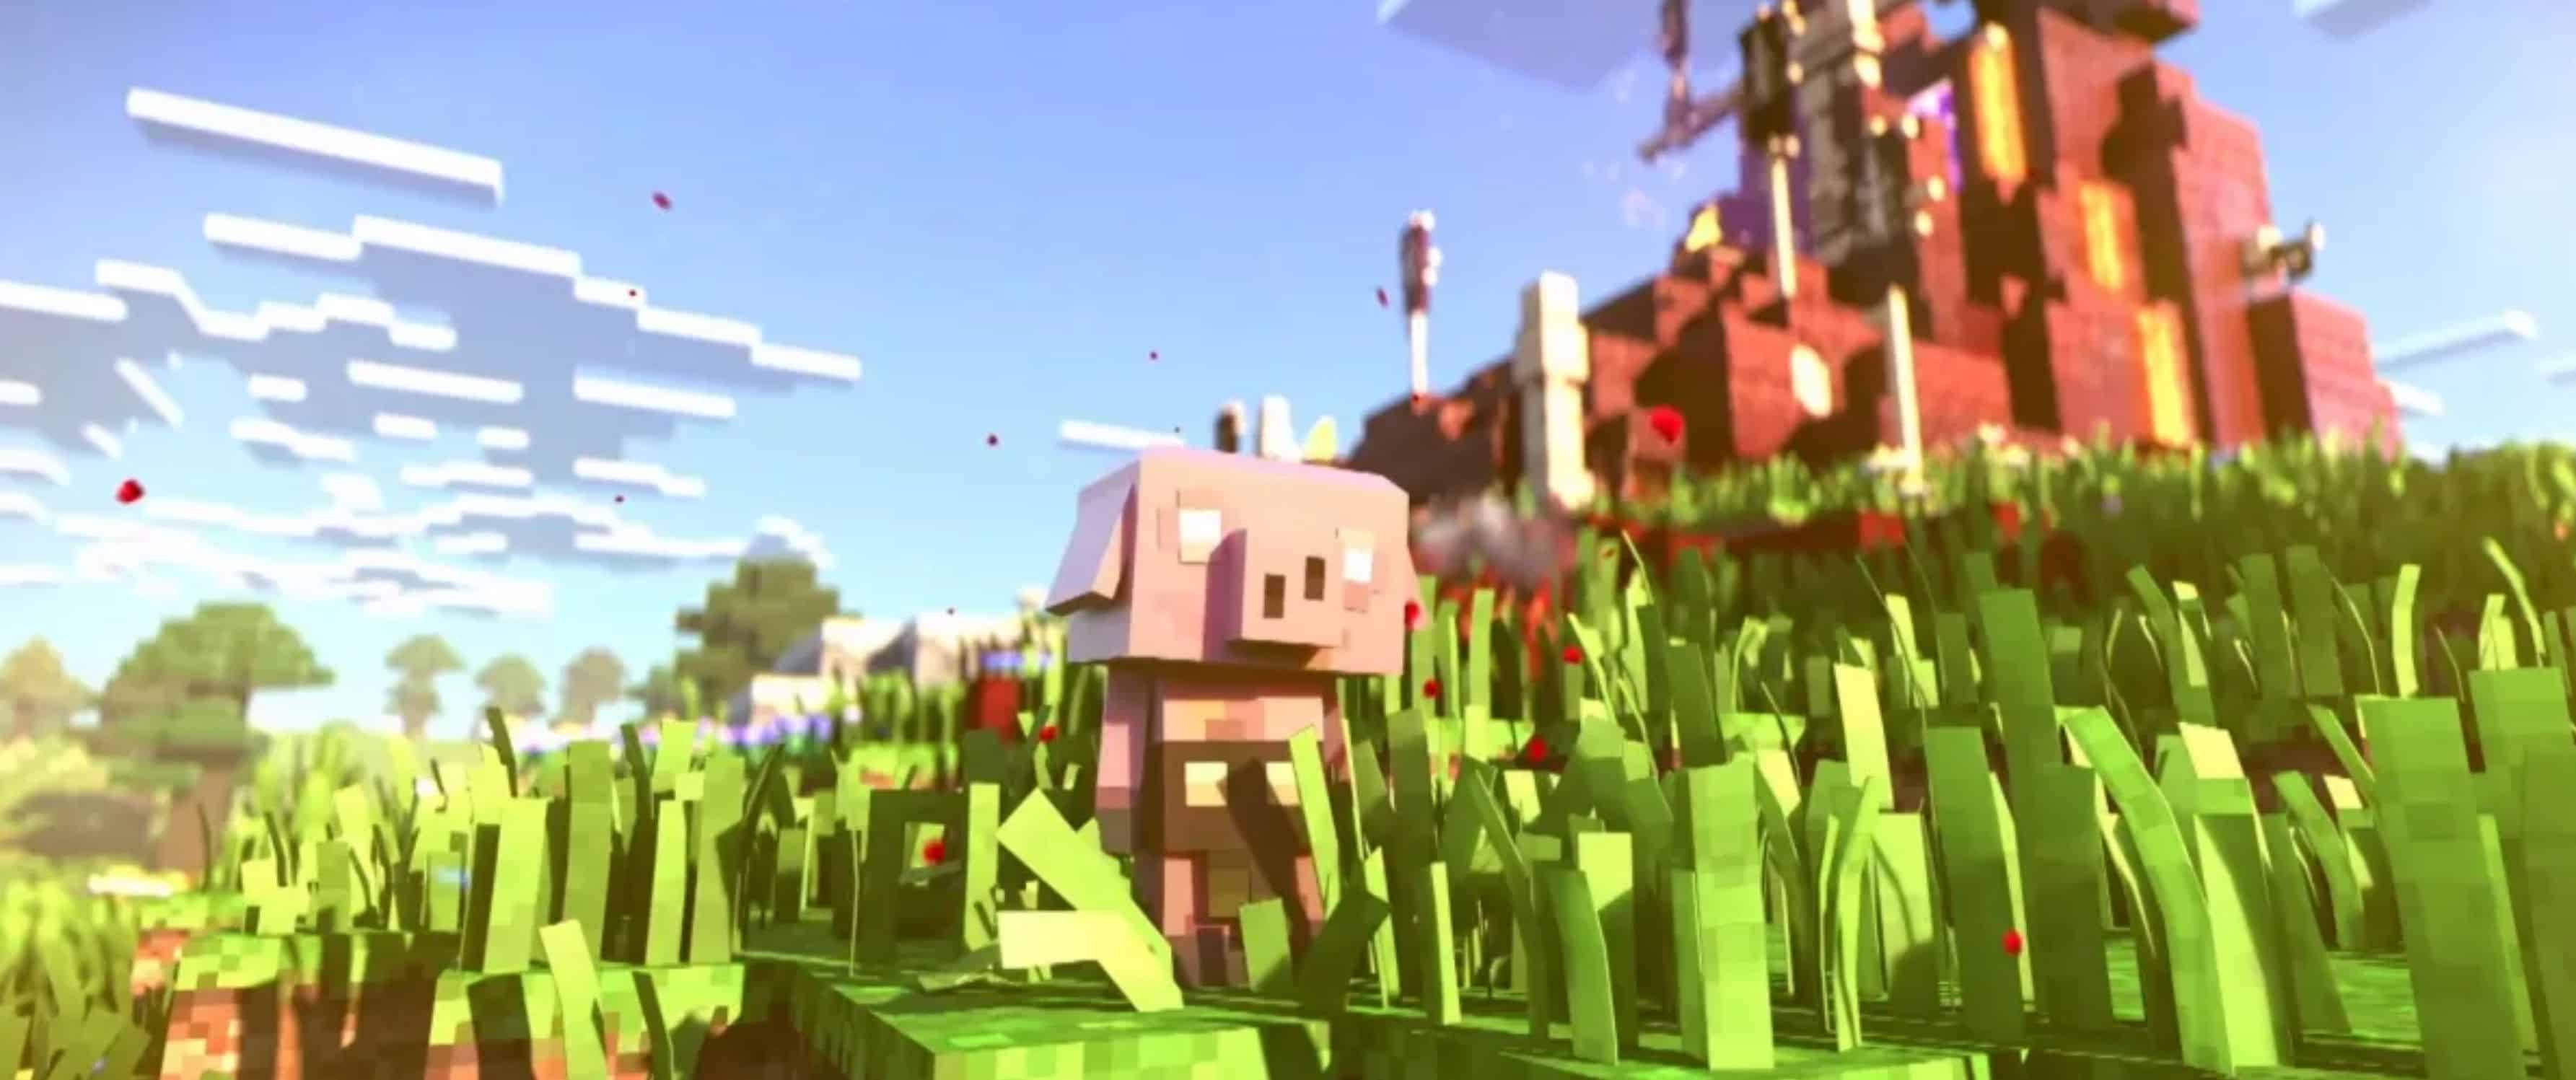 Minecraft Legends shows off its 4 player co-op in new gameplay video